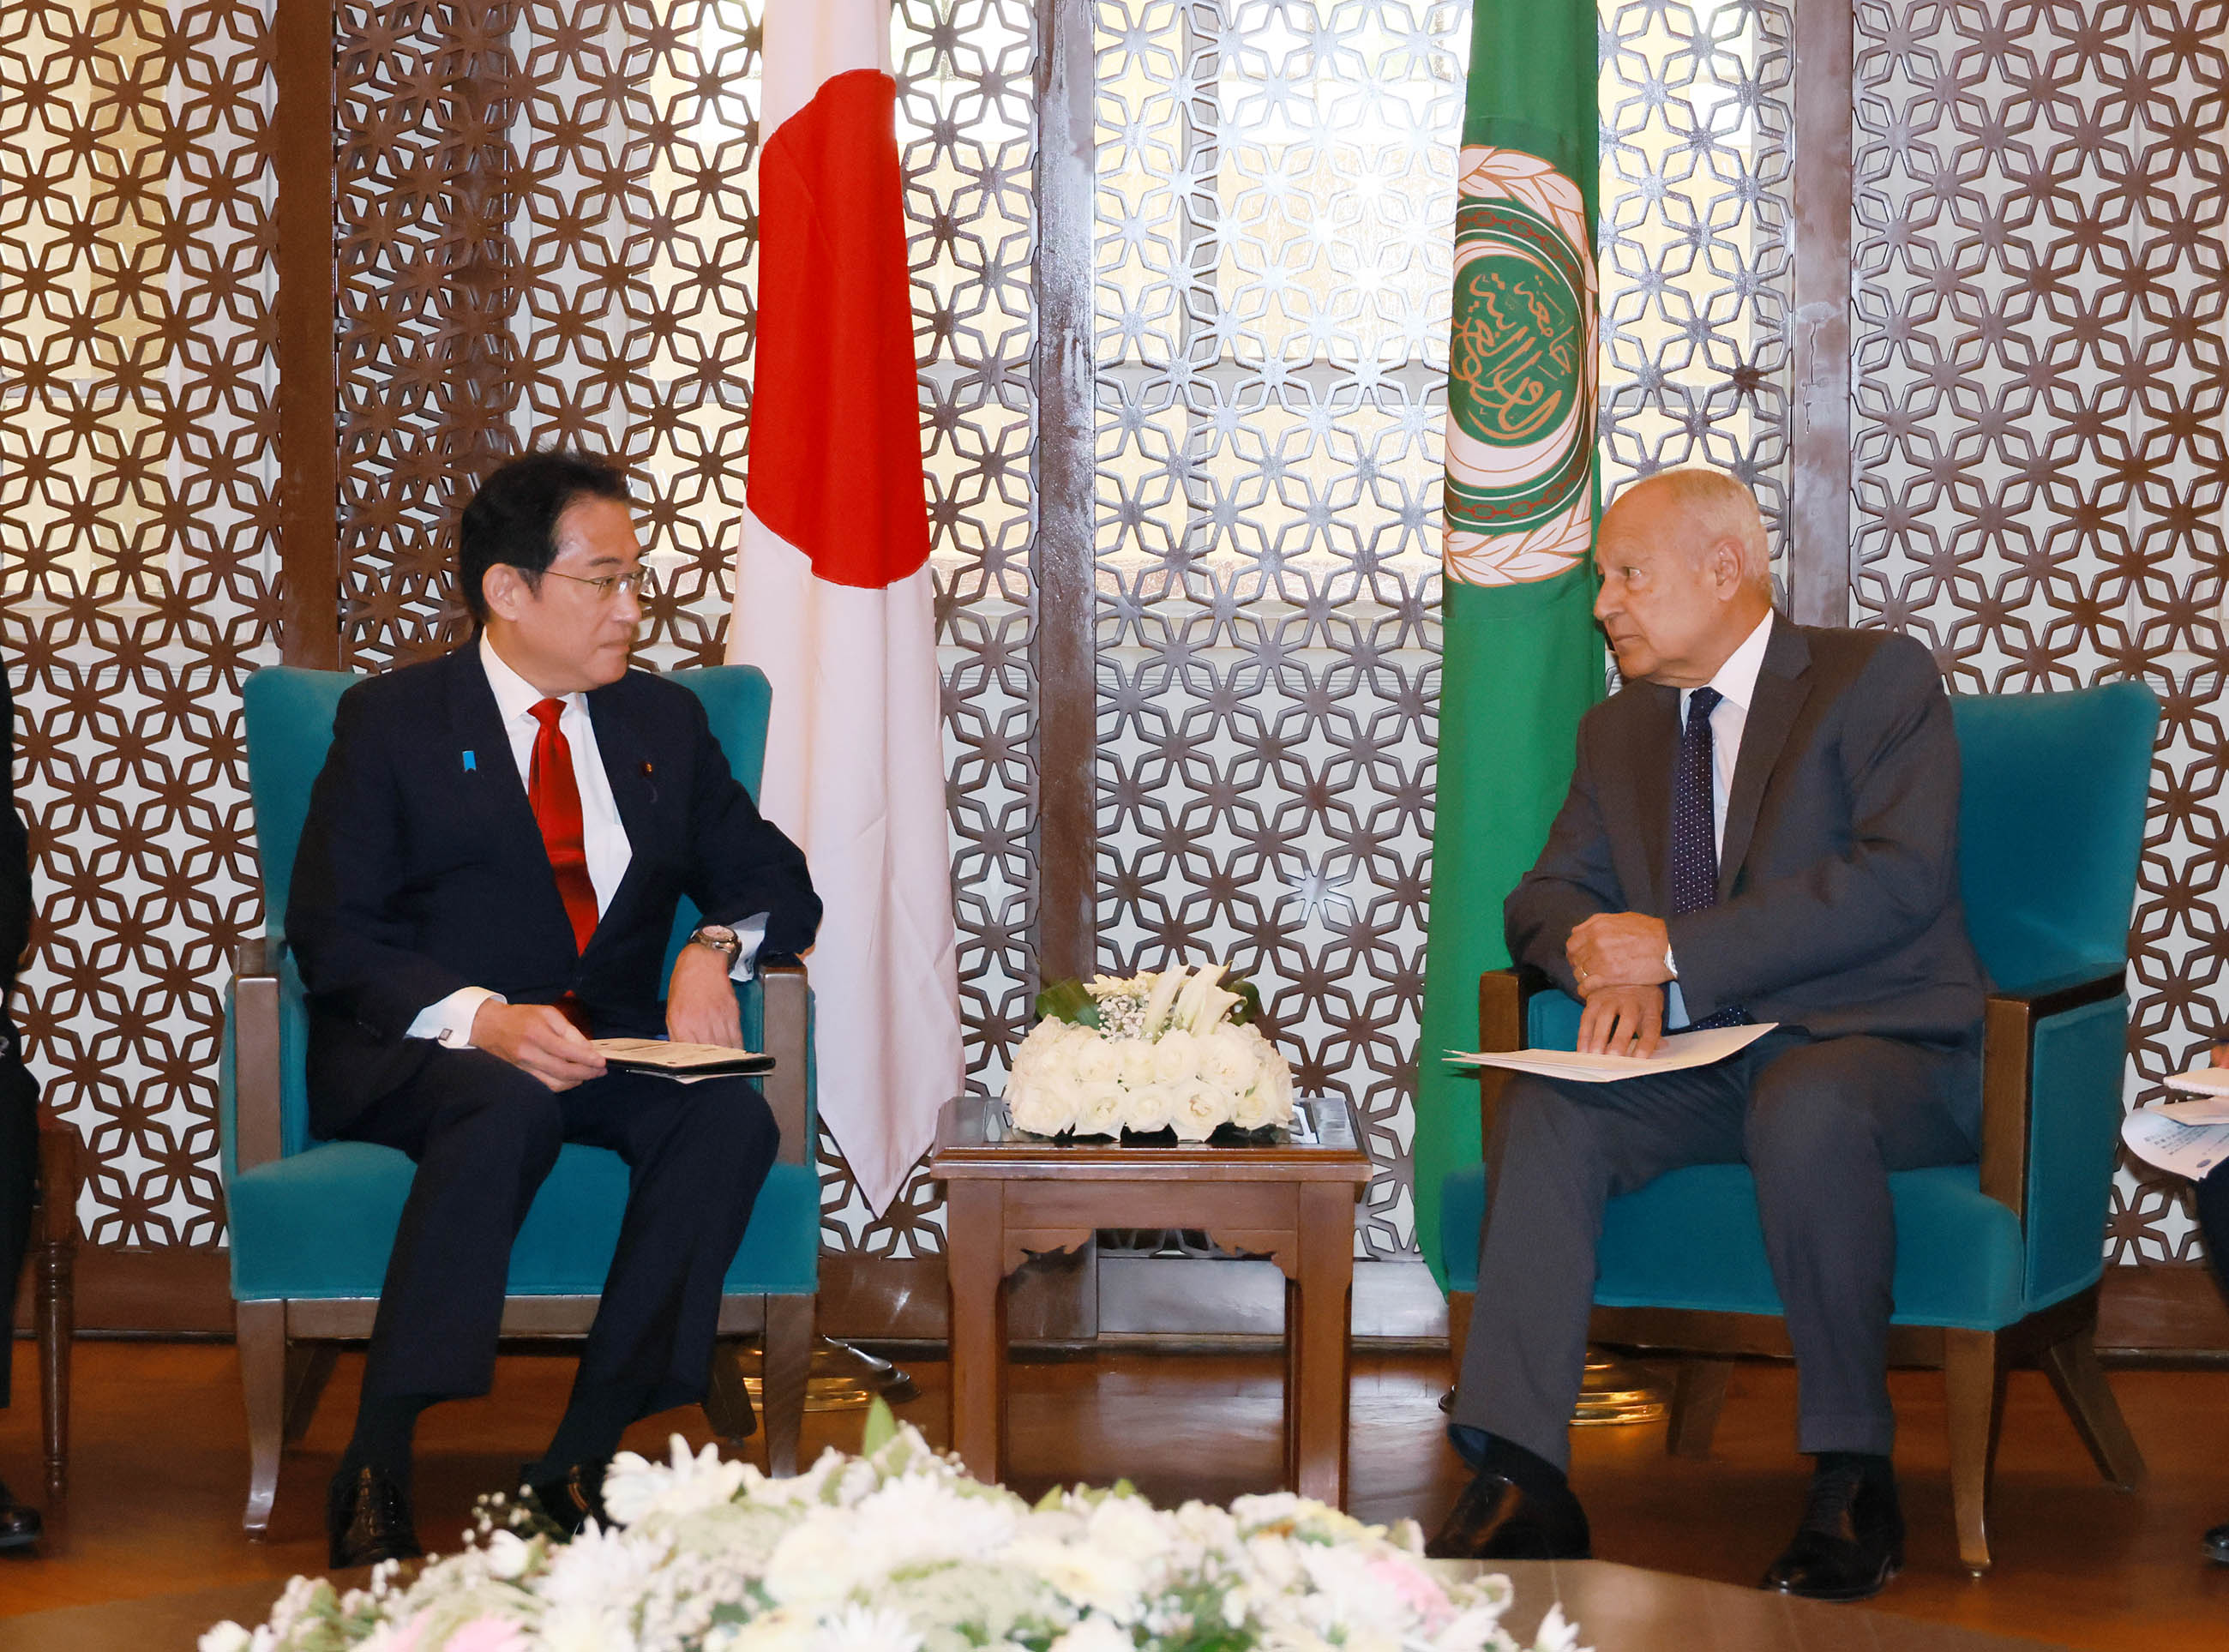 Talk between Prime Minister Kishida and Secretary General Aboul Gheit of the League of Arab States